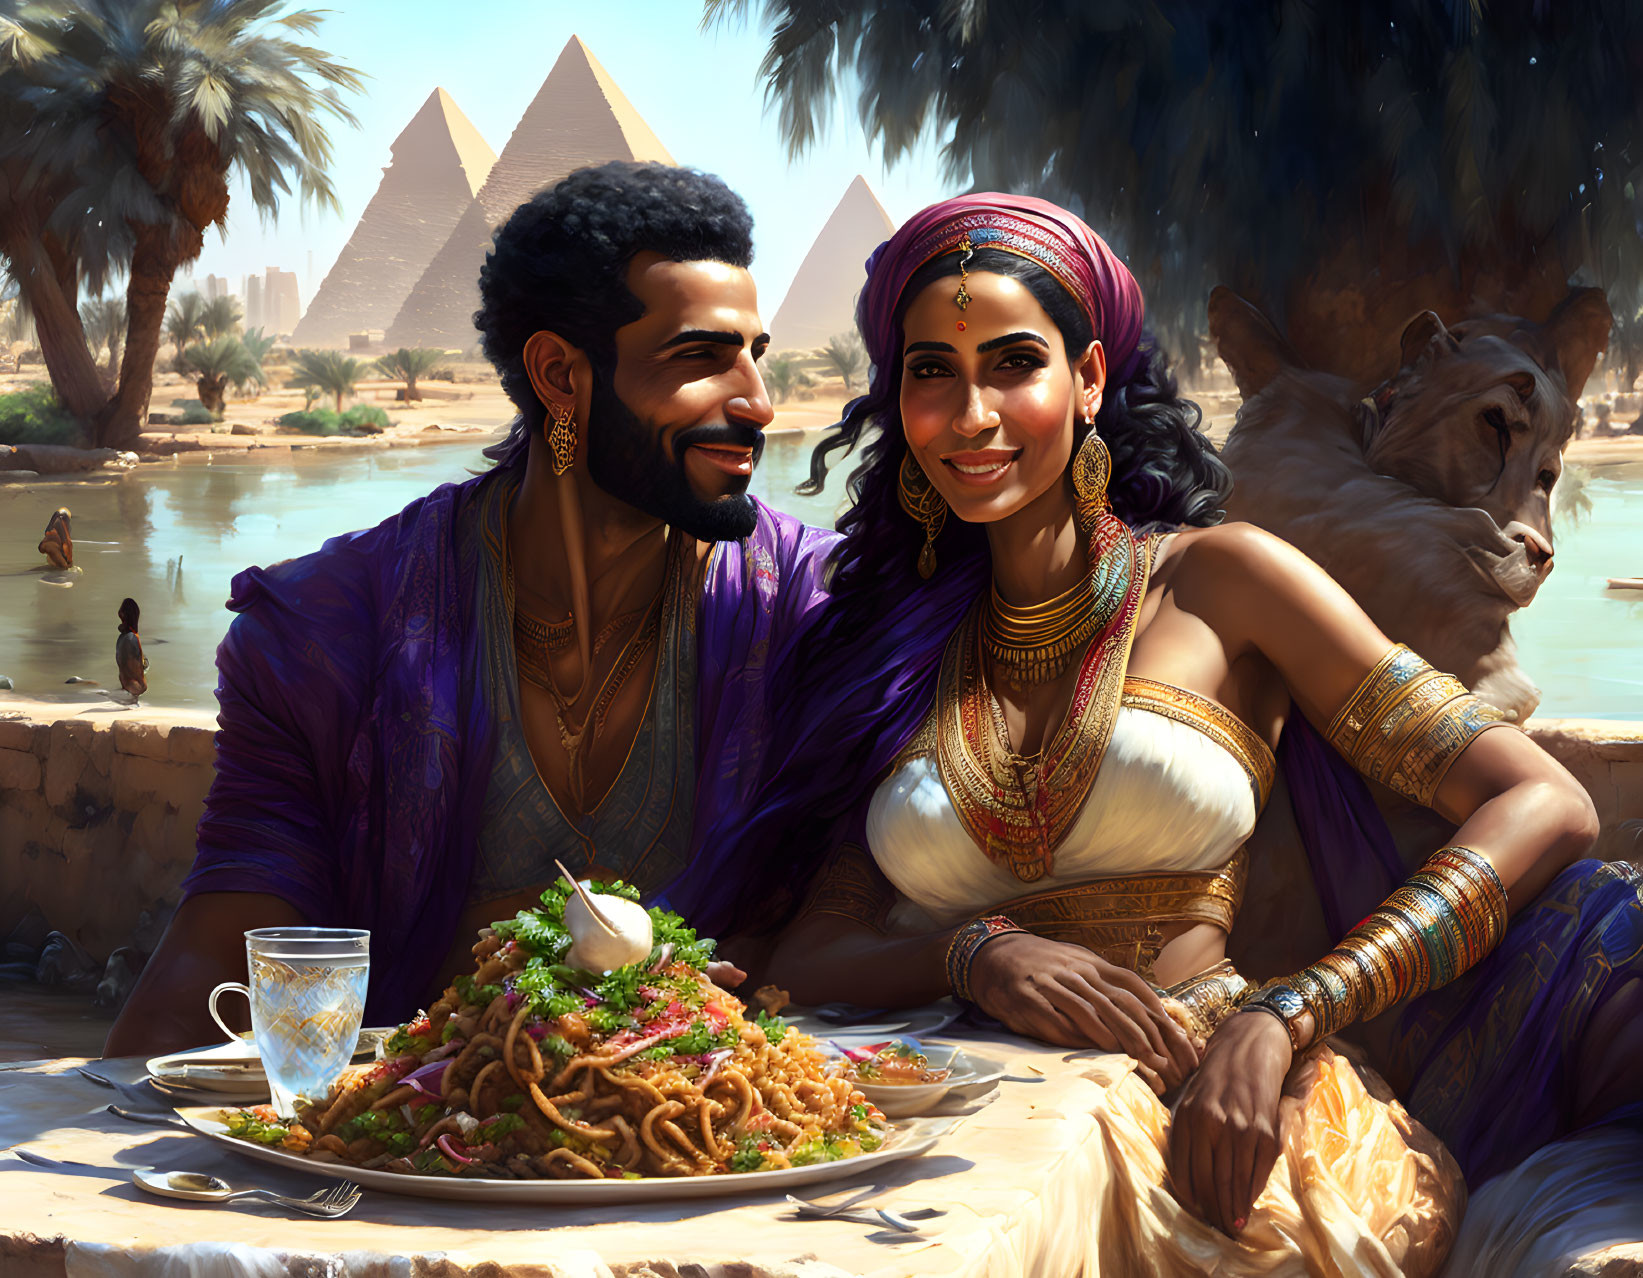 Dinner by the Nile